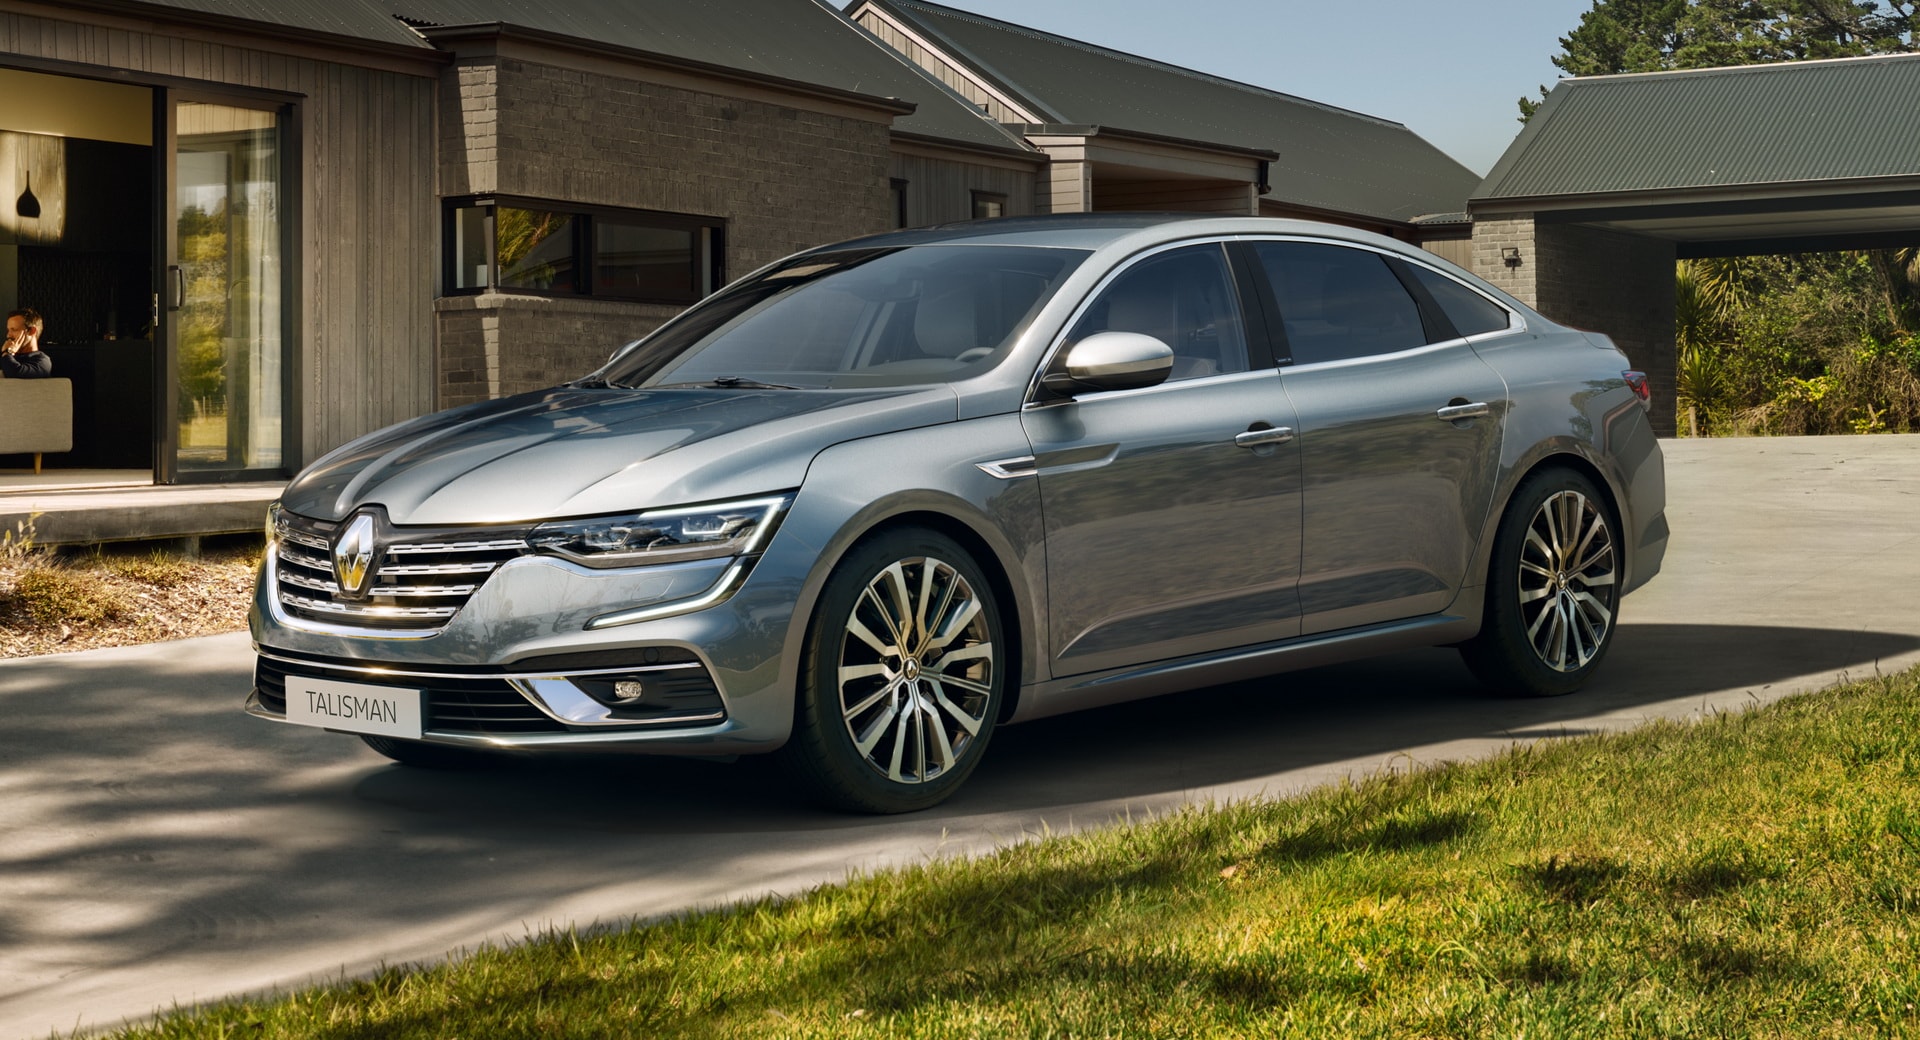 Renault Talisman 2021 Images, pictures, gallery